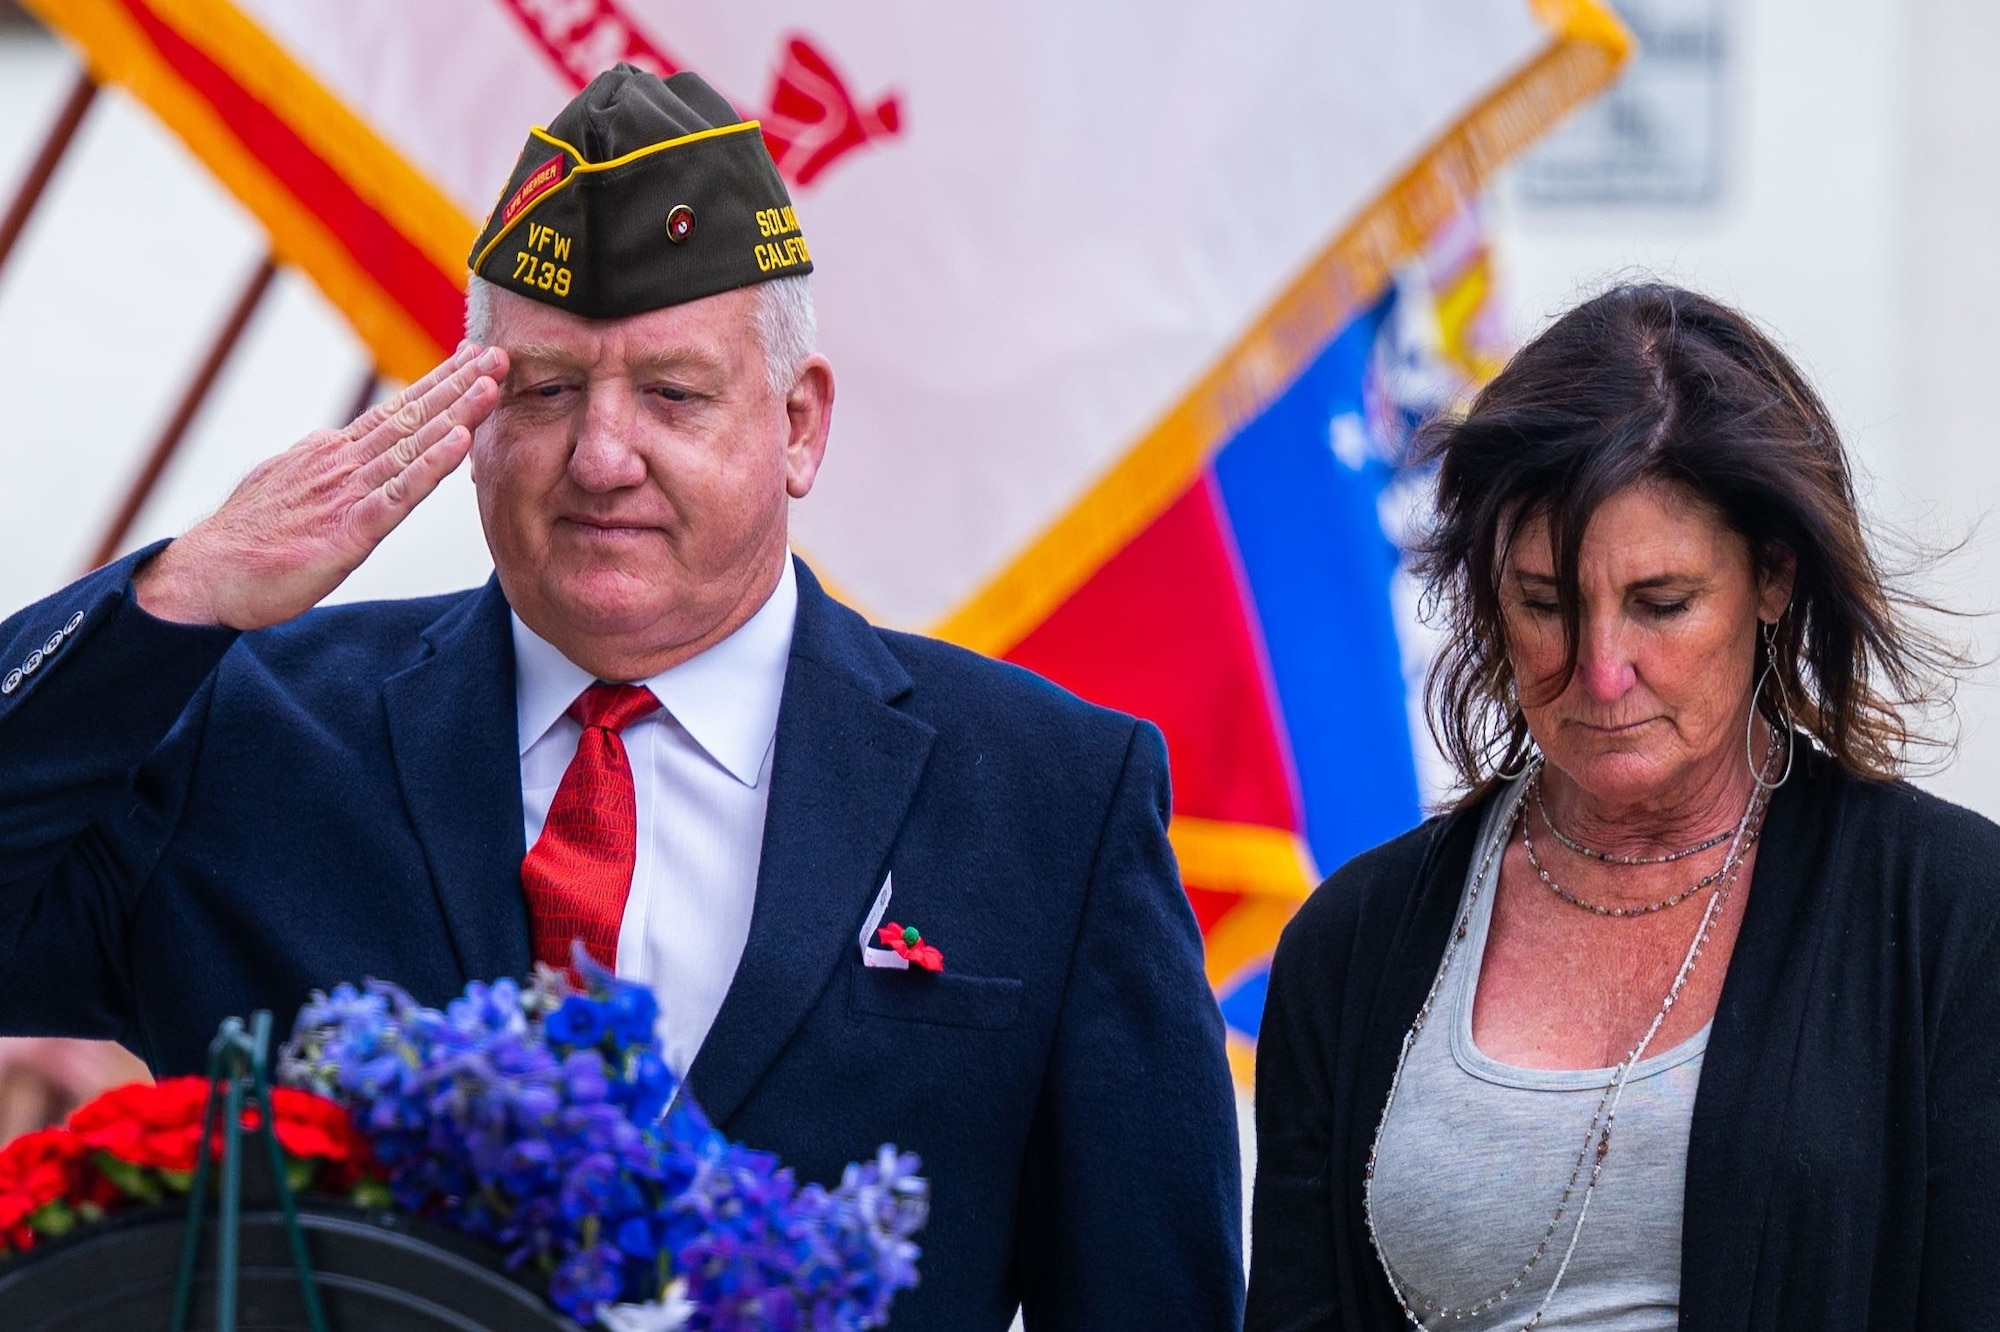 A veteran salutes while a Gold Star family member mourns during a Memorial Day ceremony at the Solvang Veterans Memorial Hall in Solvang, Calif., May 29, 2023. U.S. Space Force Maj. Gen. Douglas A. Schiess, Combined Force Space Component Command commander, gave the keynote speech to over 200 attendees that included veterans from the Global War on Terrorism, Vietnam, Korea and even one veteran from WWII. The ceremony also included the raising on the American Flag by a local Cub Scouts group and a laying of a wreath with a Gold Star family member. (U.S. Space Force photo by Tech. Sgt. Luke Kitterman)